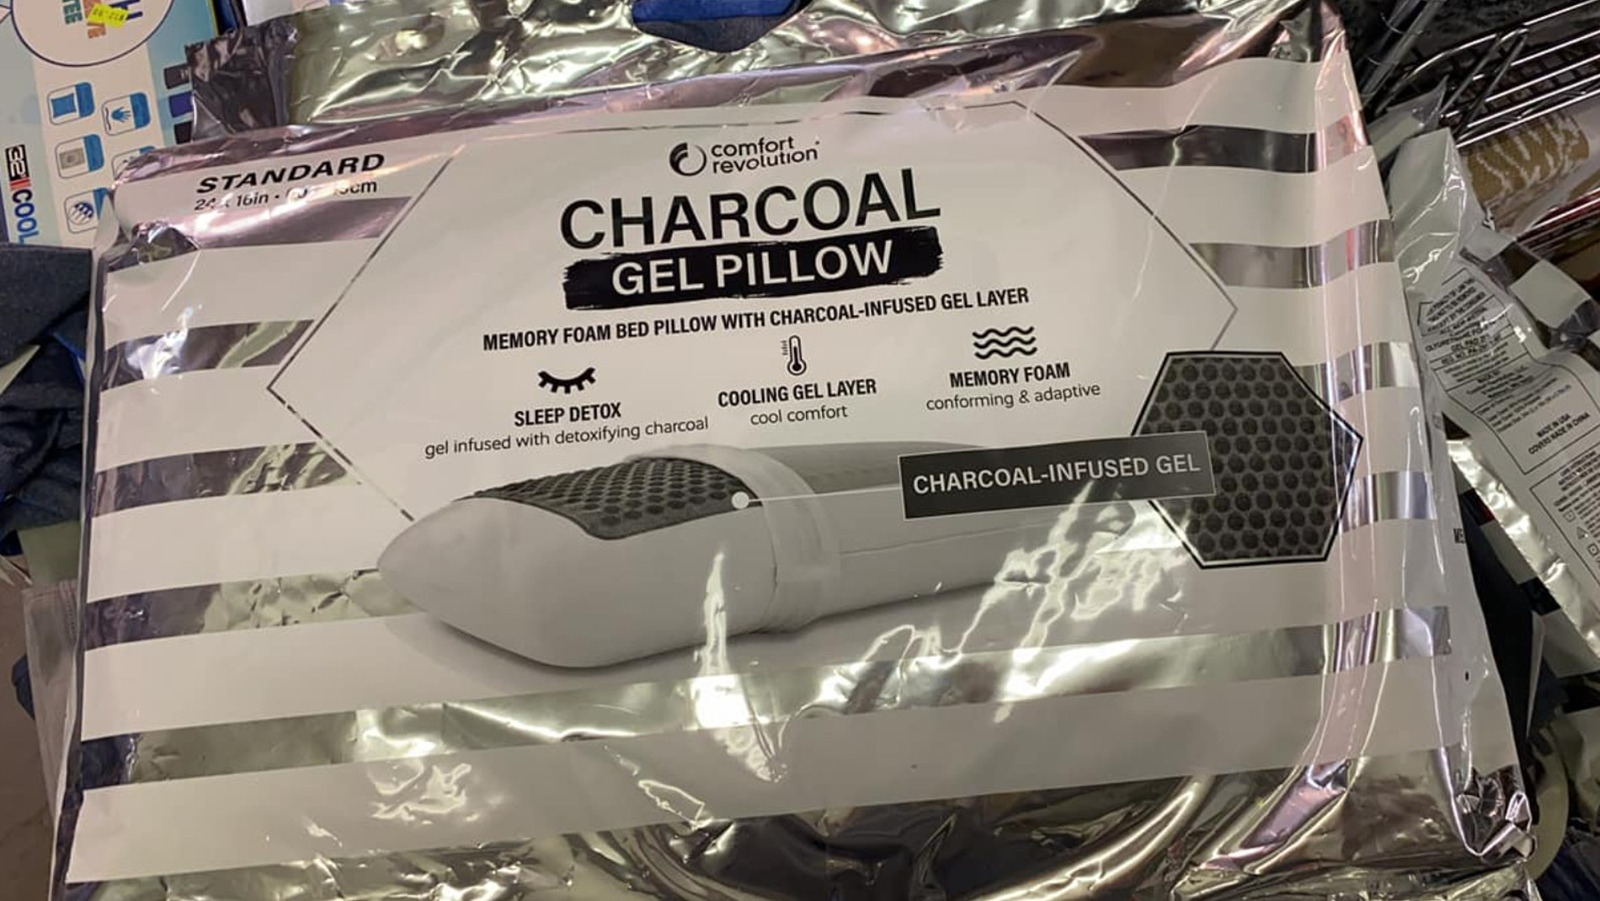 Costco Shoppers Aren't Entirely Sold On This Charcoal Gel Pillow